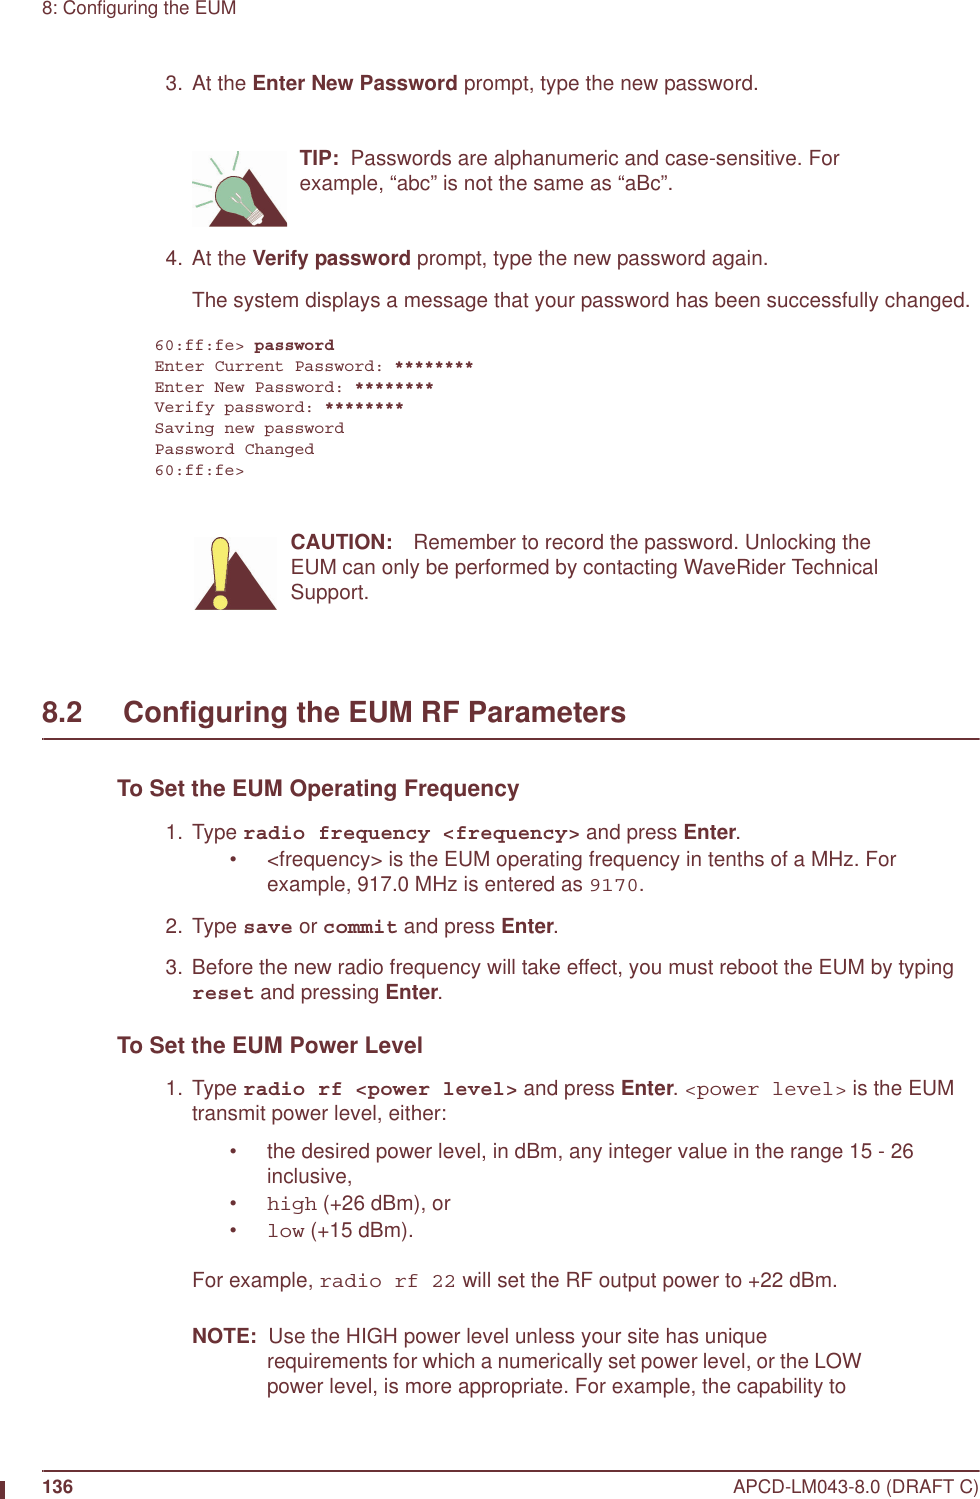 136 APCD-LM043-8.0 (DRAFT C)8: Configuring the EUM 3. At the Enter New Password prompt, type the new password.TIP:  Passwords are alphanumeric and case-sensitive. For example, “abc” is not the same as “aBc”. 4. At the Verify password prompt, type the new password again.The system displays a message that your password has been successfully changed. 60:ff:fe&gt; passwordEnter Current Password: ********Enter New Password: ********Verify password: ********Saving new passwordPassword Changed60:ff:fe&gt;CAUTION: Remember to record the password. Unlocking the EUM can only be performed by contacting WaveRider Technical Support. 8.2     Configuring the EUM RF ParametersTo Set the EUM Operating Frequency 1. Type radio frequency &lt;frequency&gt; and press Enter. • &lt;frequency&gt; is the EUM operating frequency in tenths of a MHz. For example, 917.0 MHz is entered as 9170. 2. Type save or commit and press Enter.  3. Before the new radio frequency will take effect, you must reboot the EUM by typing reset and pressing Enter.To Set the EUM Power Level 1. Type radio rf &lt;power level&gt; and press Enter. &lt;power level&gt; is the EUM transmit power level, either:• the desired power level, in dBm, any integer value in the range 15 - 26 inclusive, •high (+26 dBm), or•low (+15 dBm).For example, radio rf 22 will set the RF output power to +22 dBm.NOTE:  Use the HIGH power level unless your site has unique requirements for which a numerically set power level, or the LOW power level, is more appropriate. For example, the capability to 